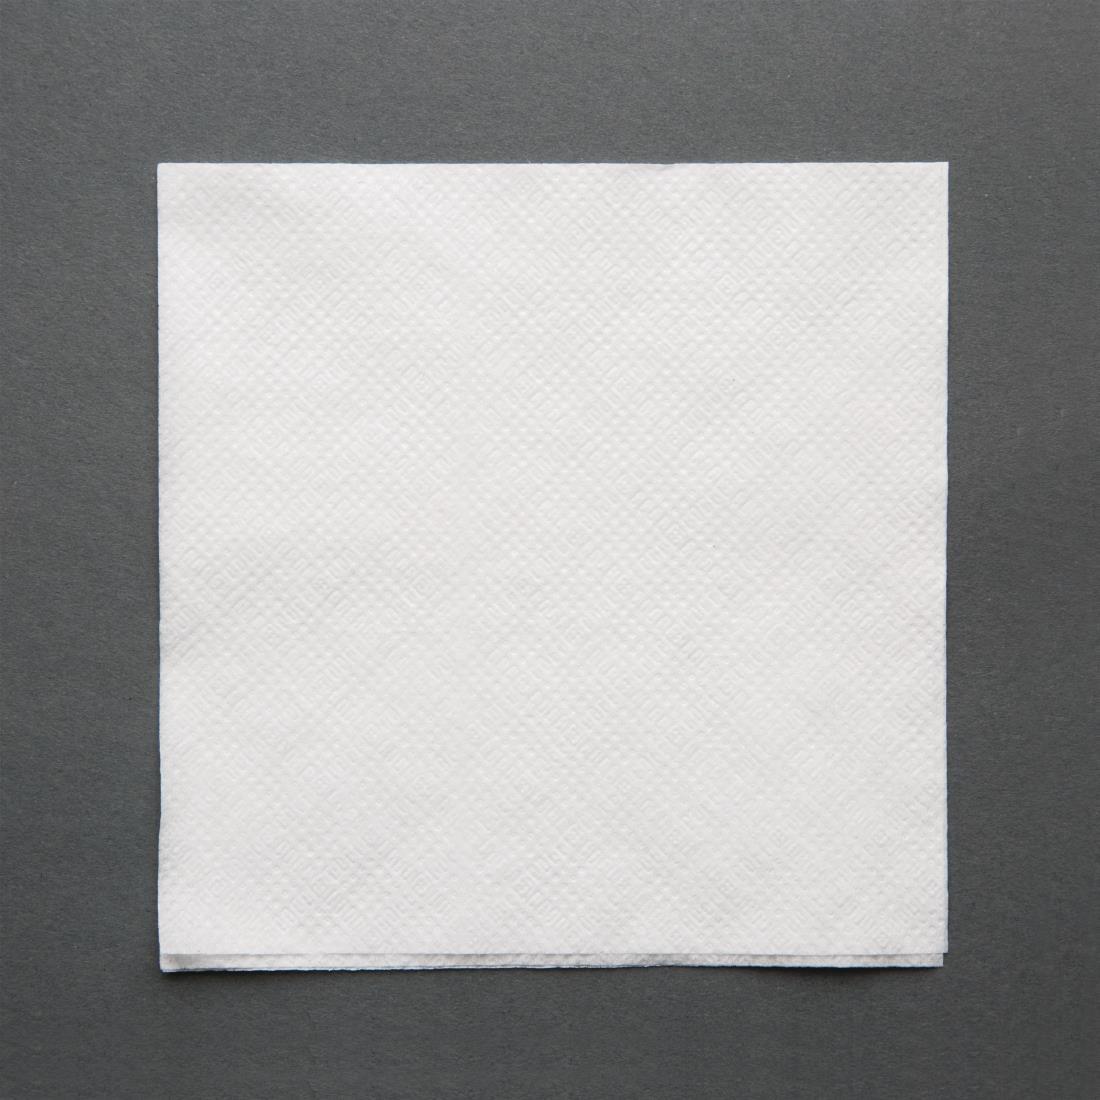 Fiesta Recyclable Cocktail Napkin White 24x24cm 1ply 1/4 Fold (Pack of 2000) - CM560  - 2